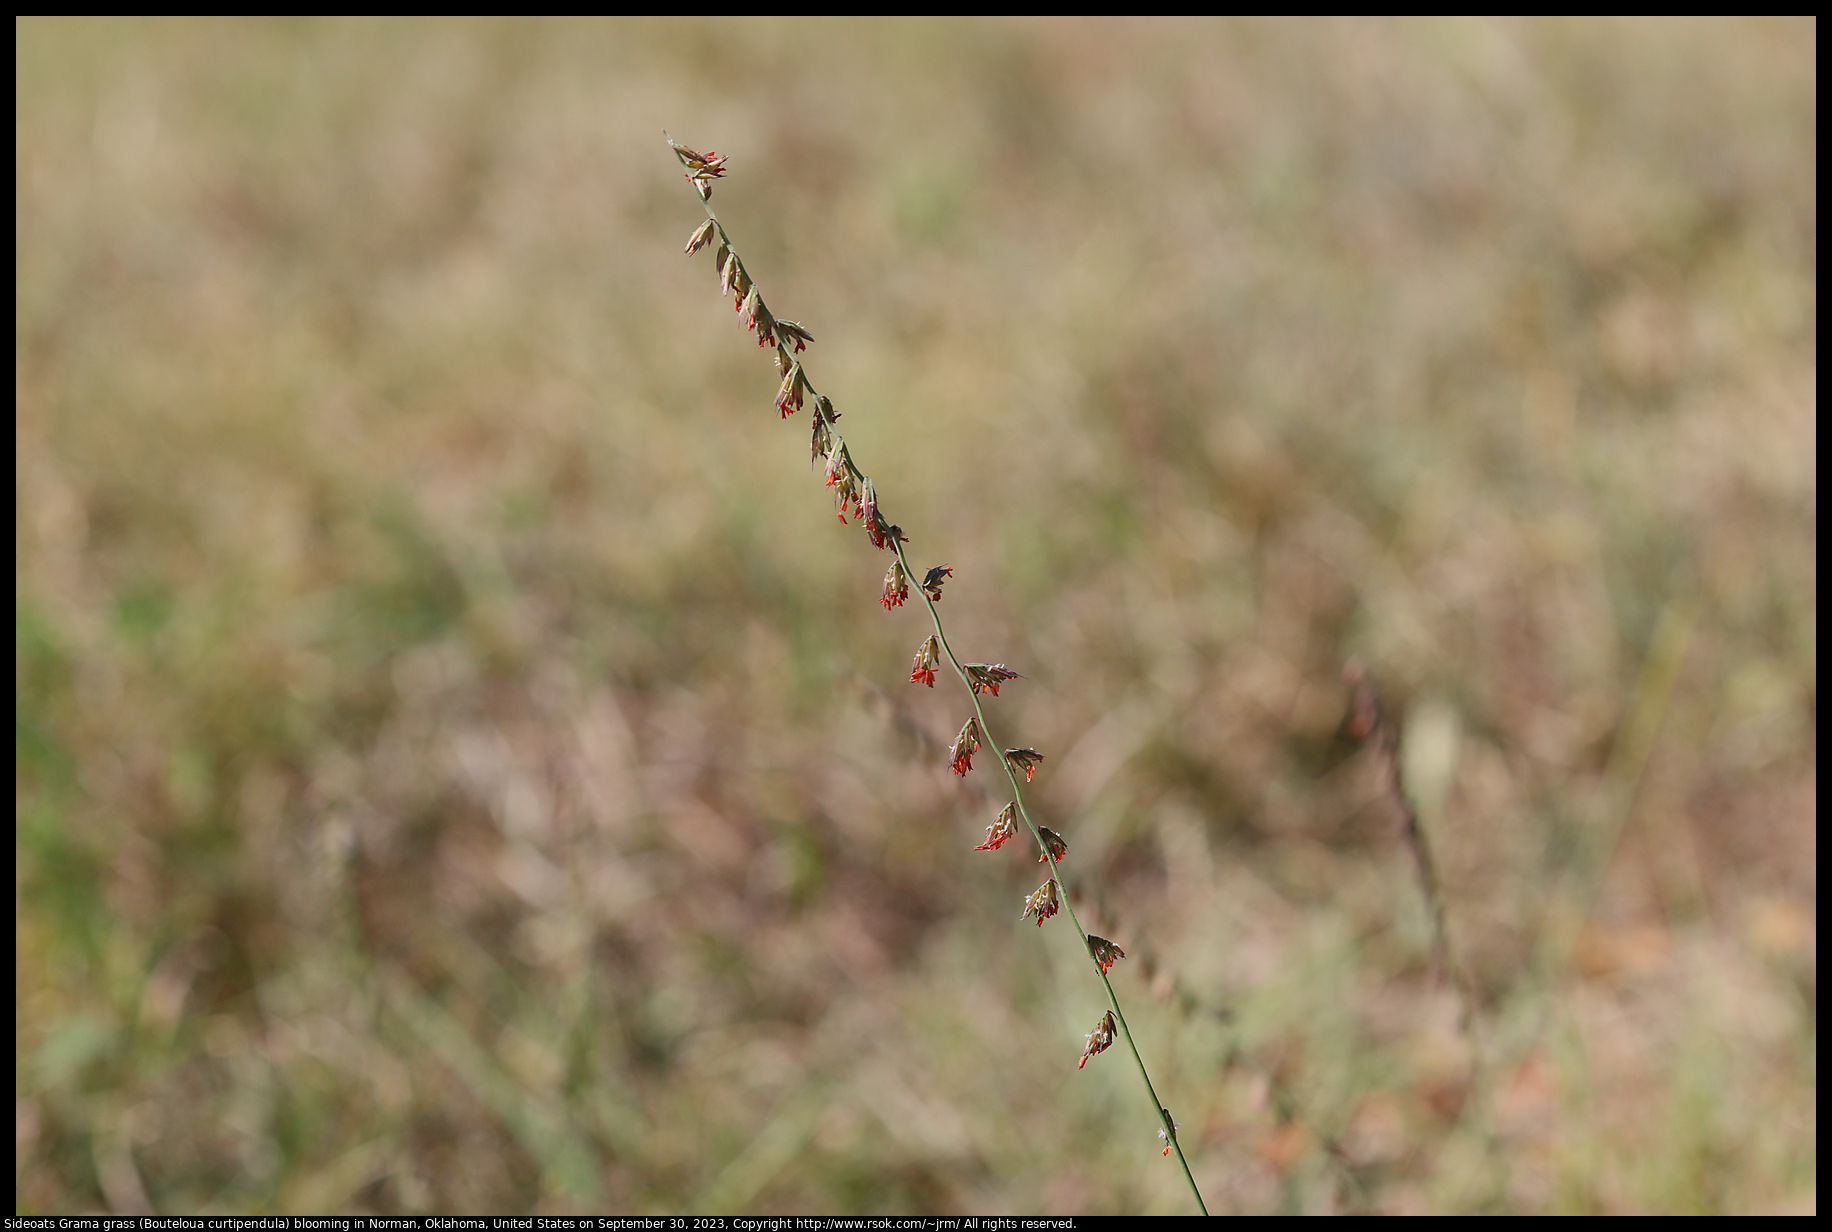 Sideoats Grama grass (Bouteloua curtipendula) blooming in Norman, Oklahoma, United States, September 30, 2023